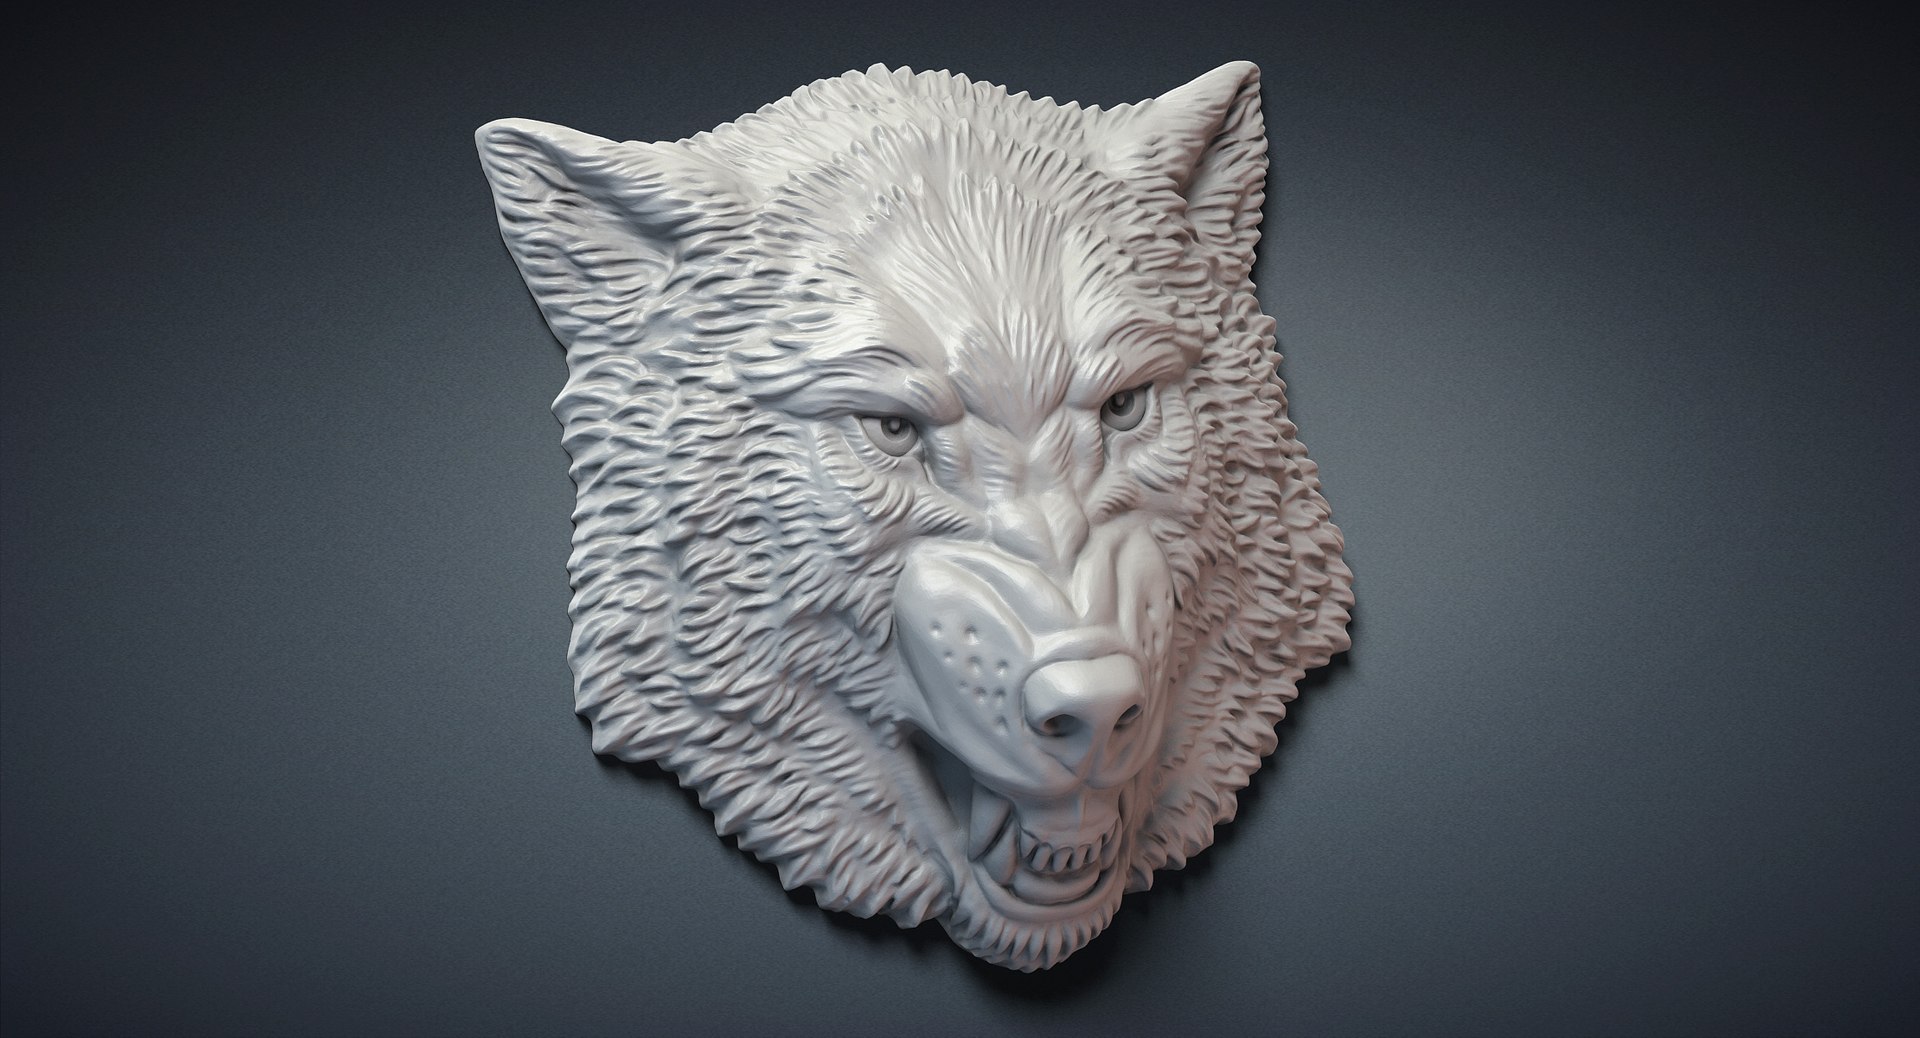 Angry Wolf Relief Face 3D Model - TurboSquid 1307845